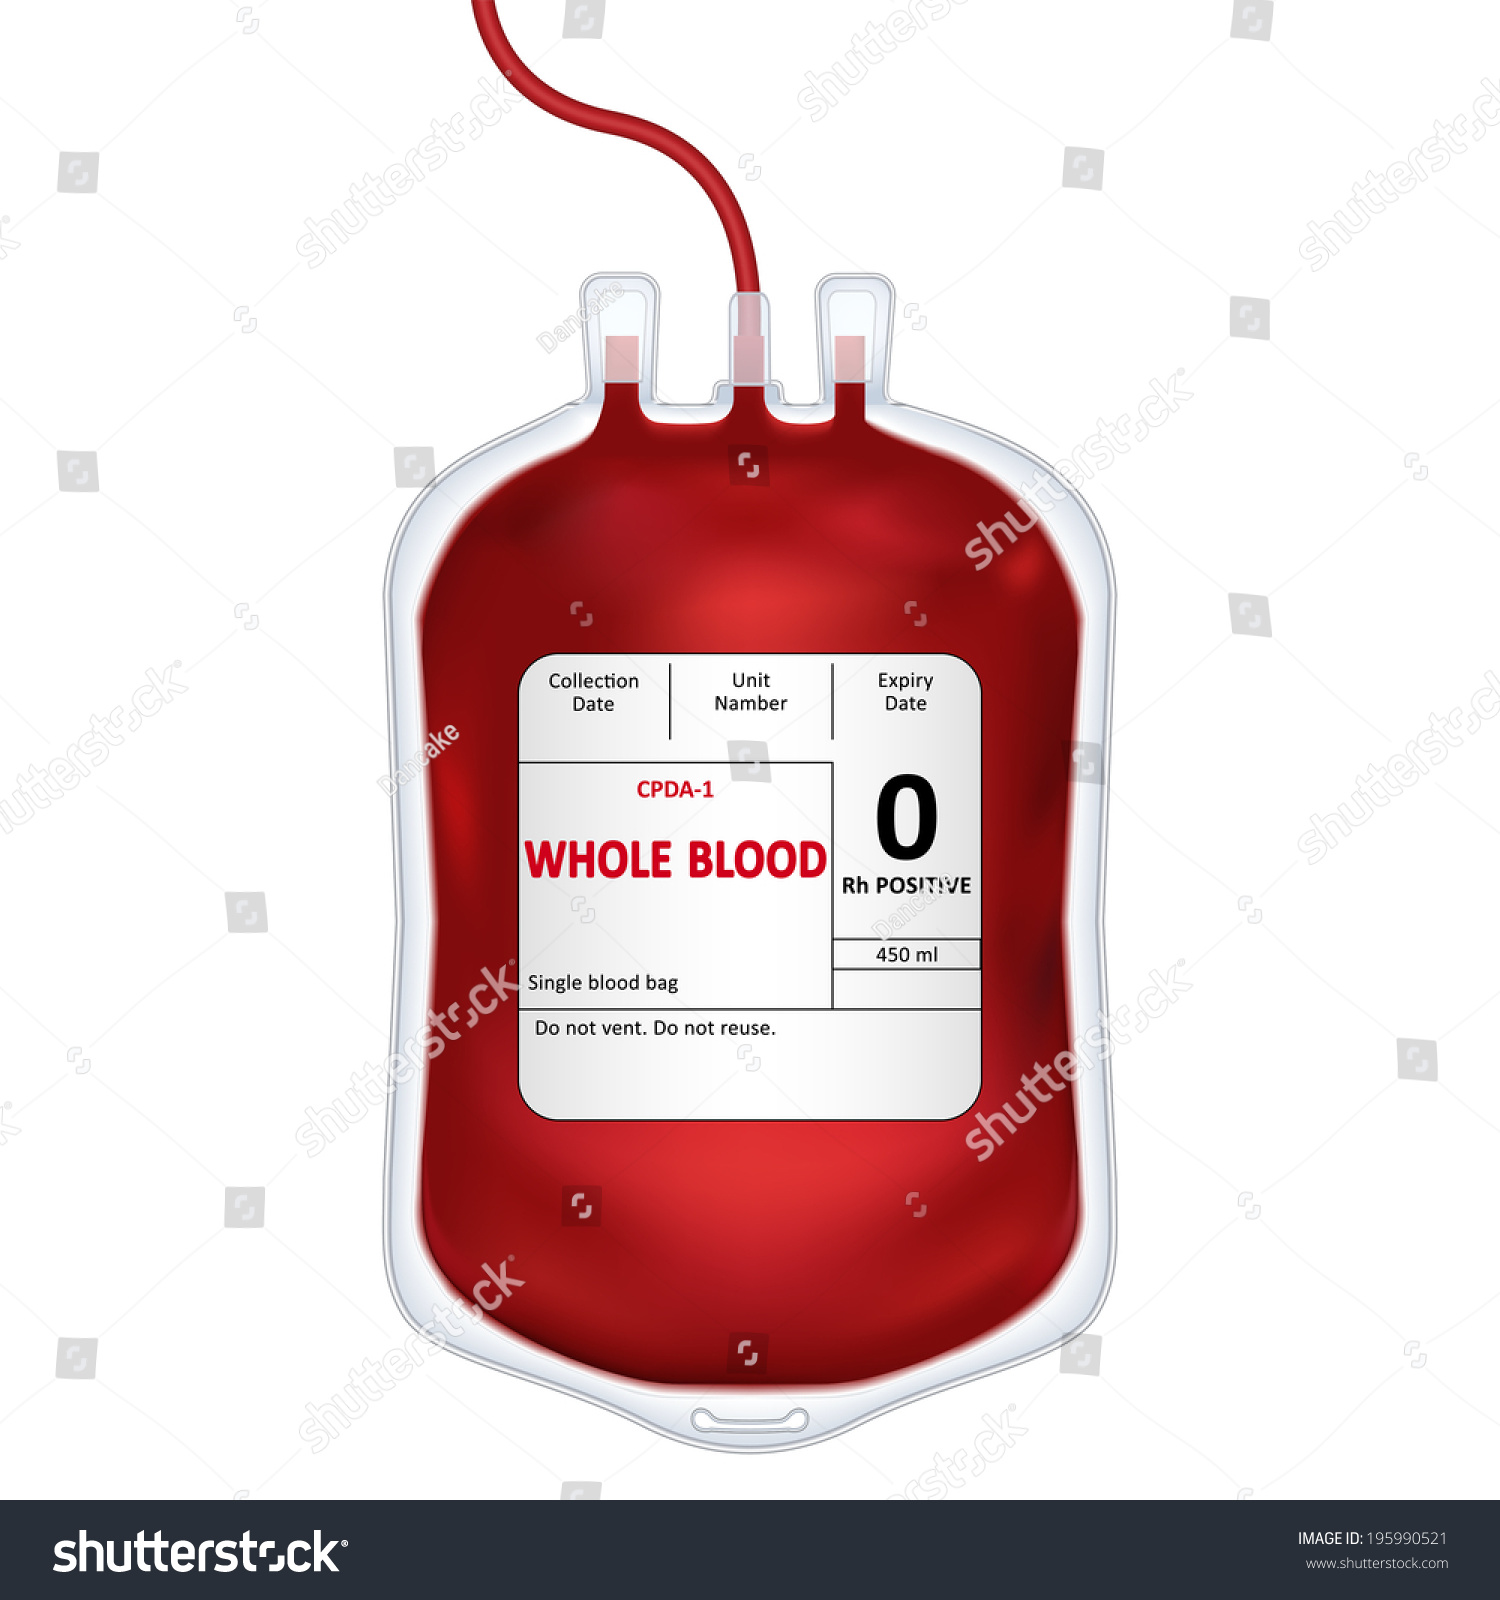 blood bank clipart - photo #34